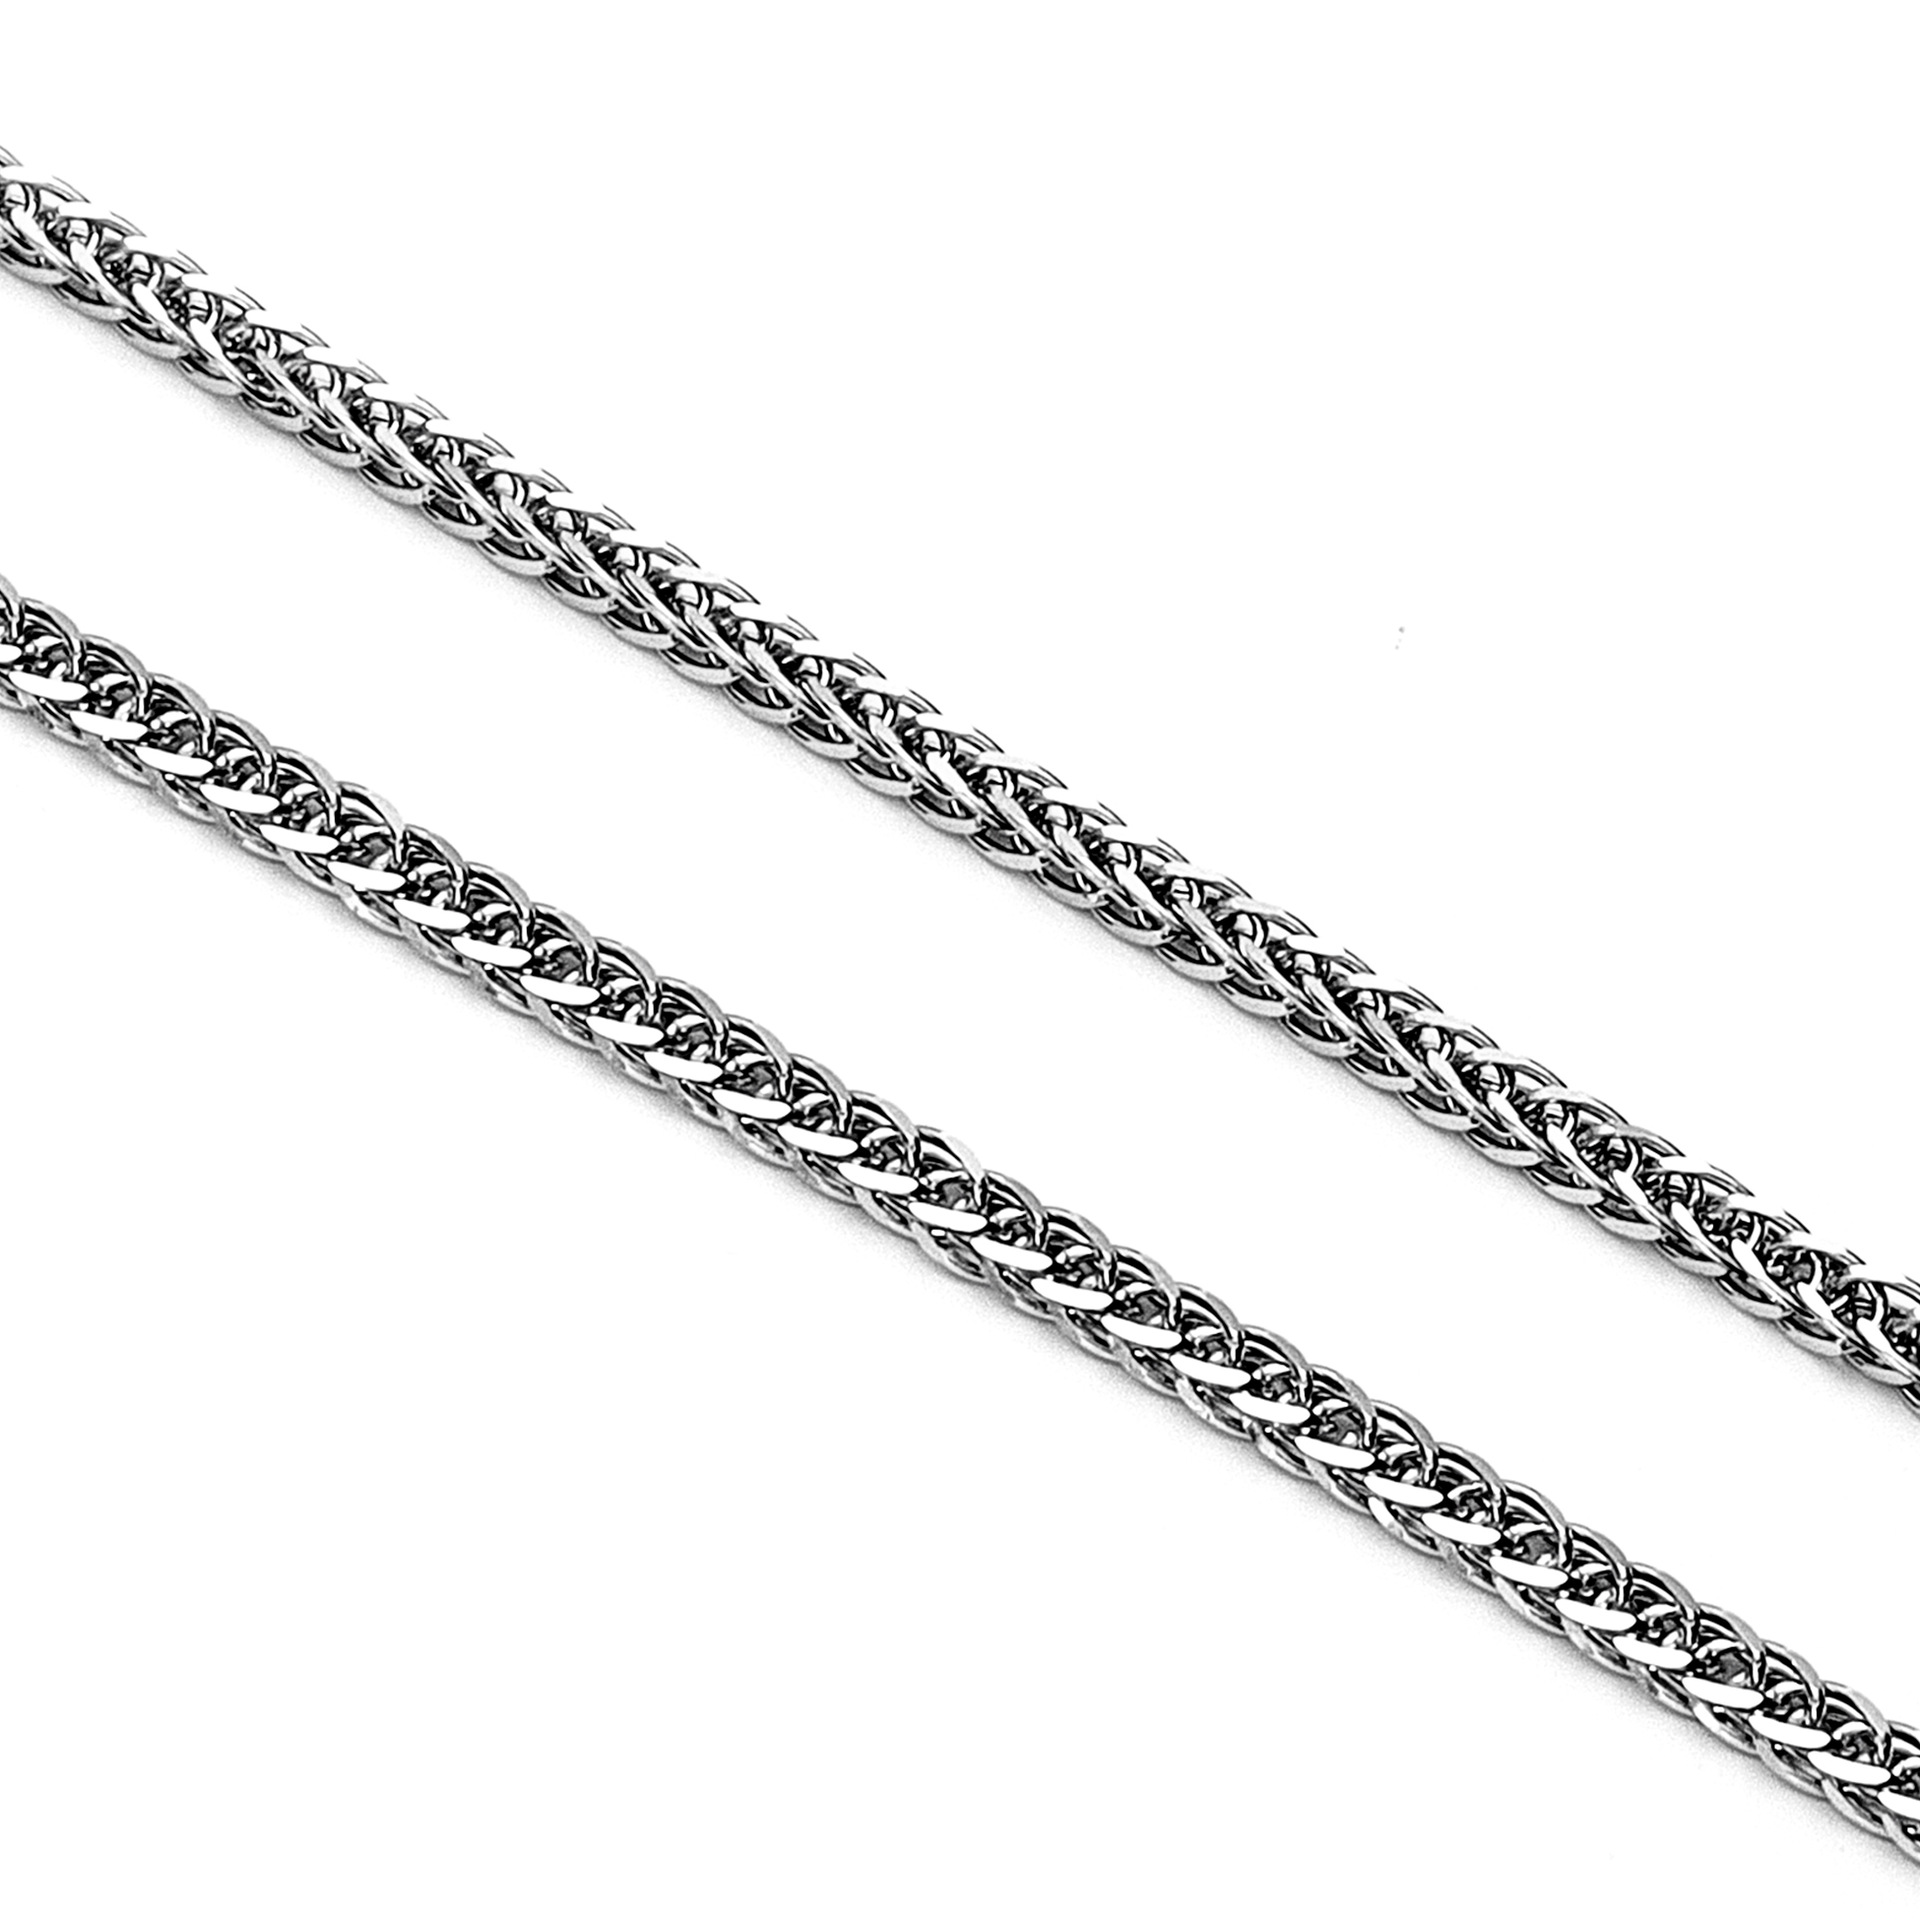 S999 Sterling Silver Necklace for Women Cross Chain Shiny O-Type Chain Gypsophila Chain Chopin Chain Light Luxury High-Grade Pure Silver Clavicle Chain